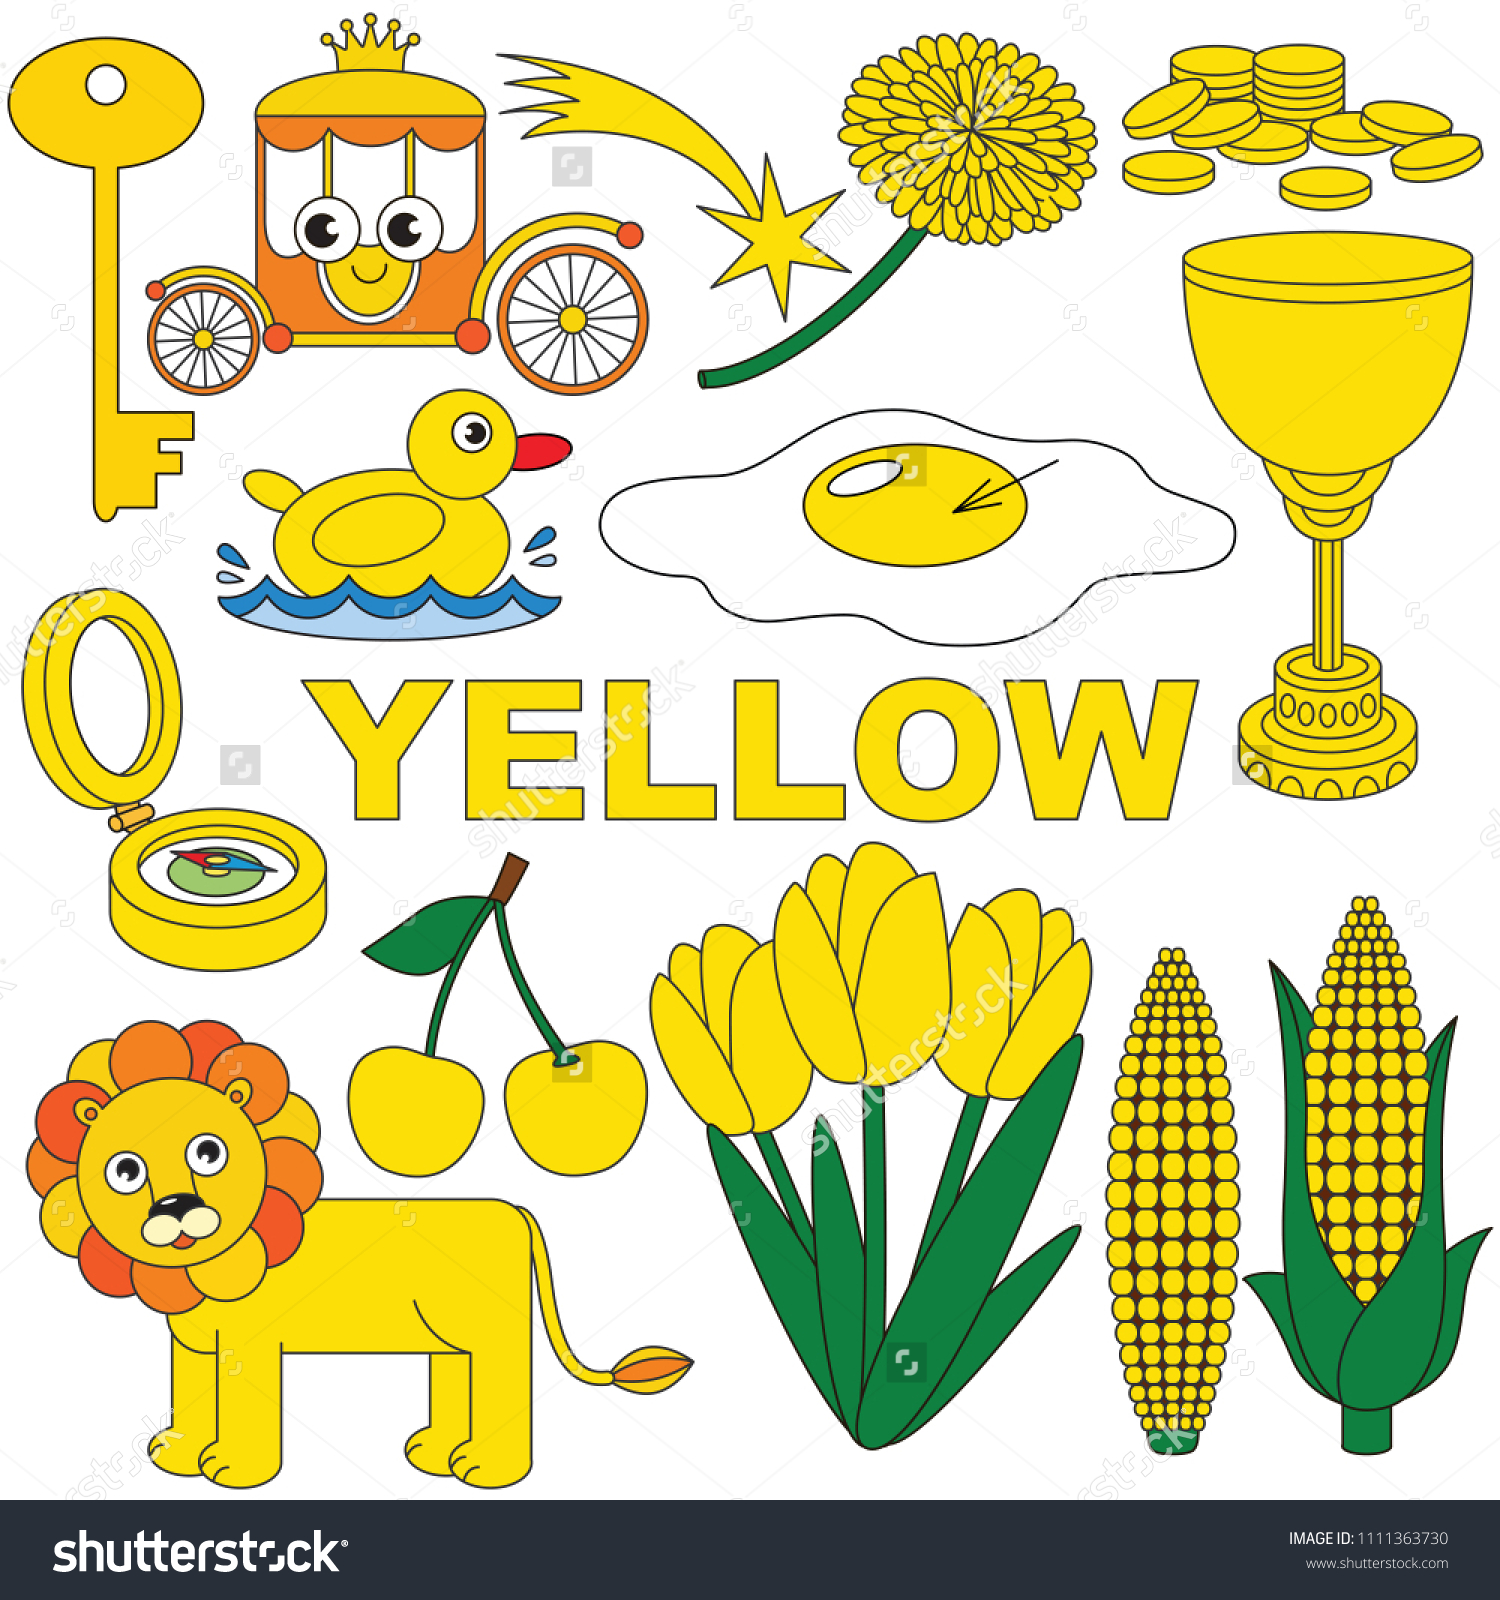 Download Clipart Yellow Things Images - Images | Amashusho